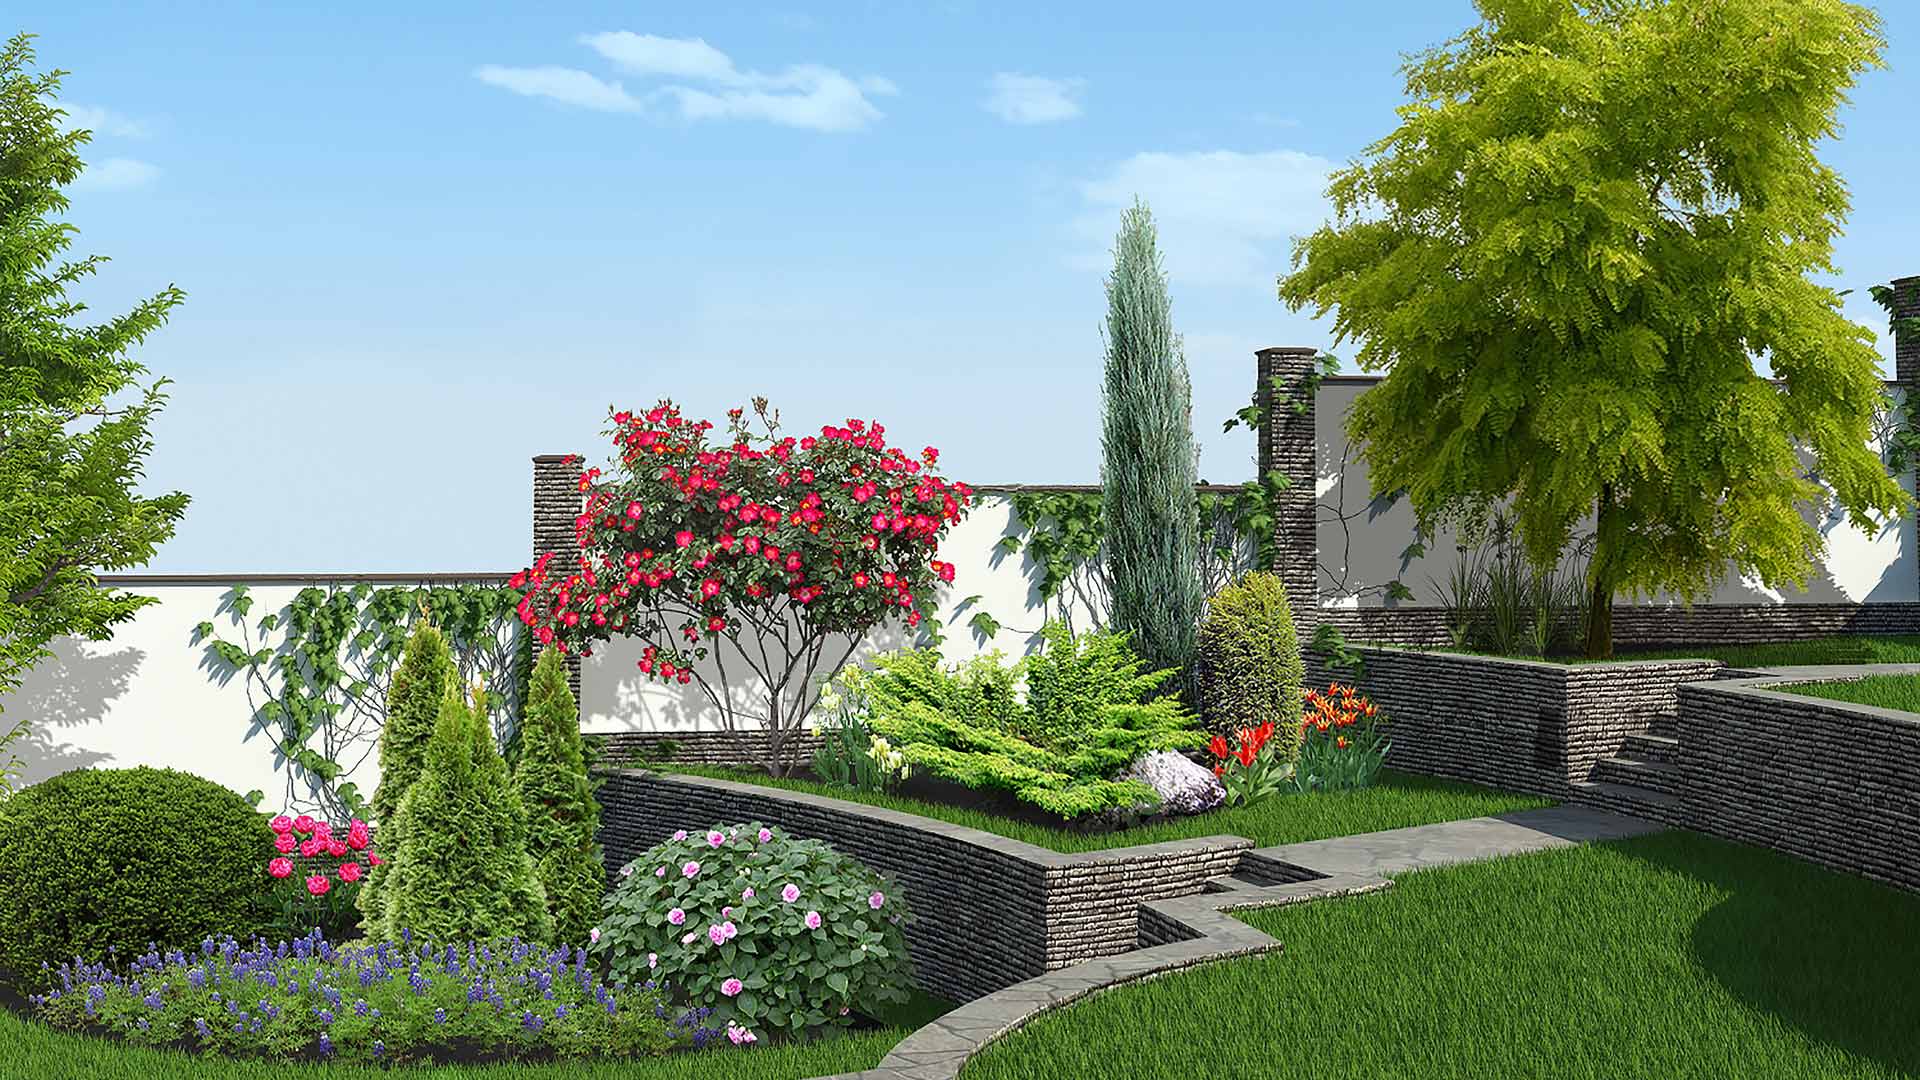 The Benefits of Using a Design Rendering for Your Landscaping Project